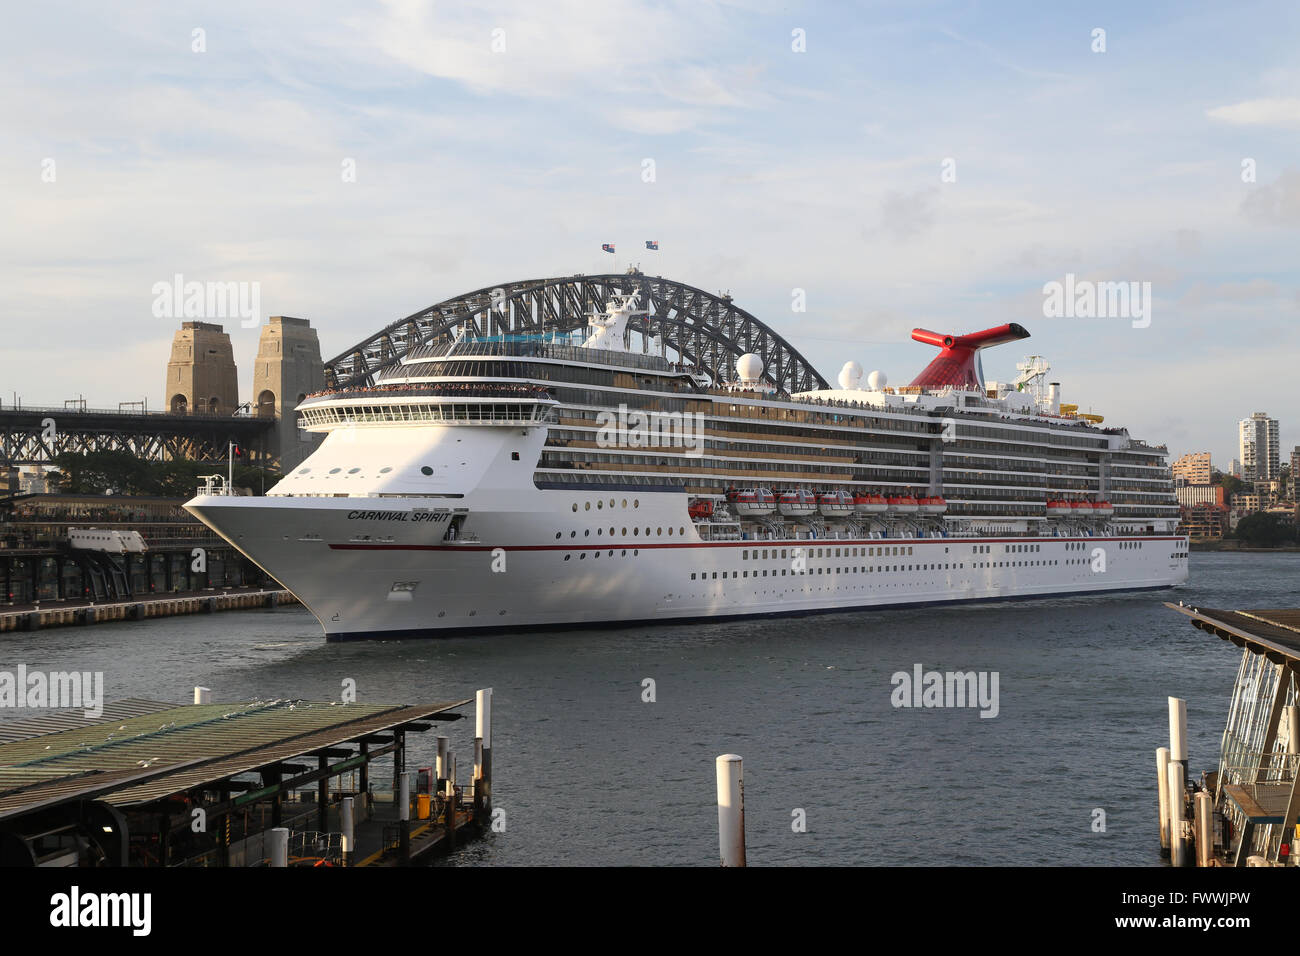 Sydney, Australia. 2 March 2016. The Carnival Spirit cruise ship arrived in Sydney & docked at the Overseas Passenger Terminal. Stock Photo